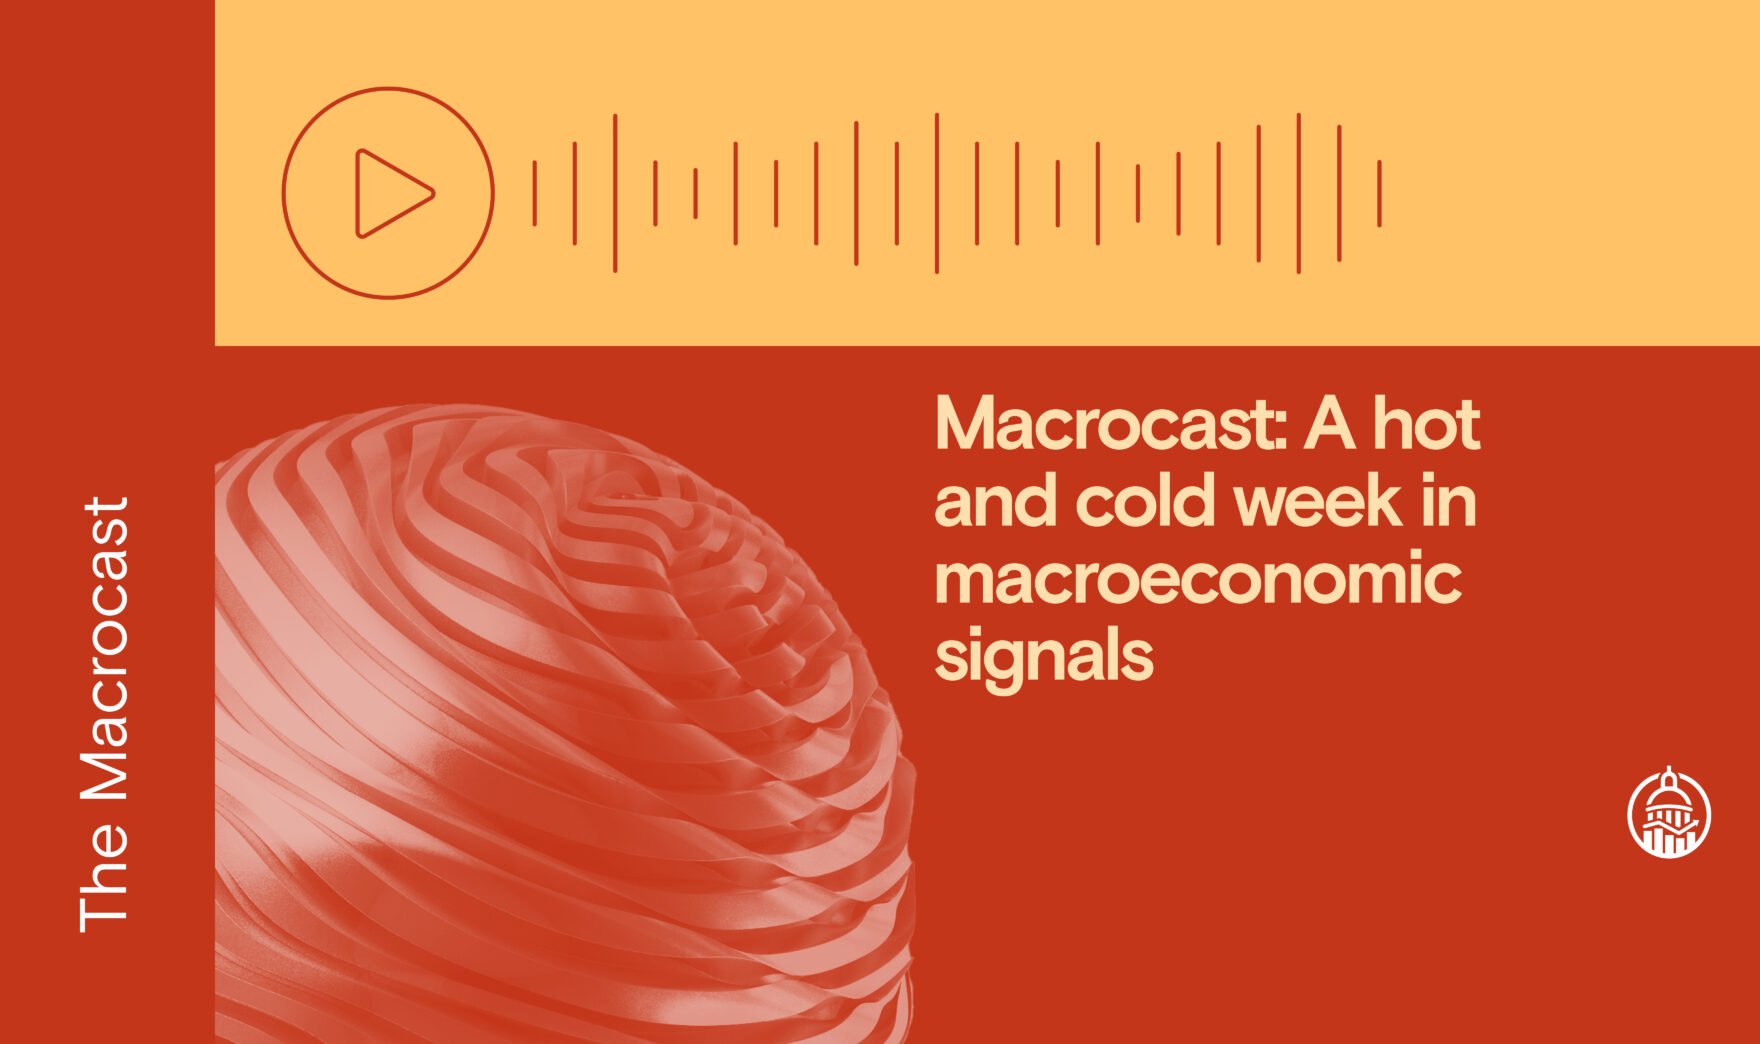 Macrocast: A hot and cold week in macroeconomic signals